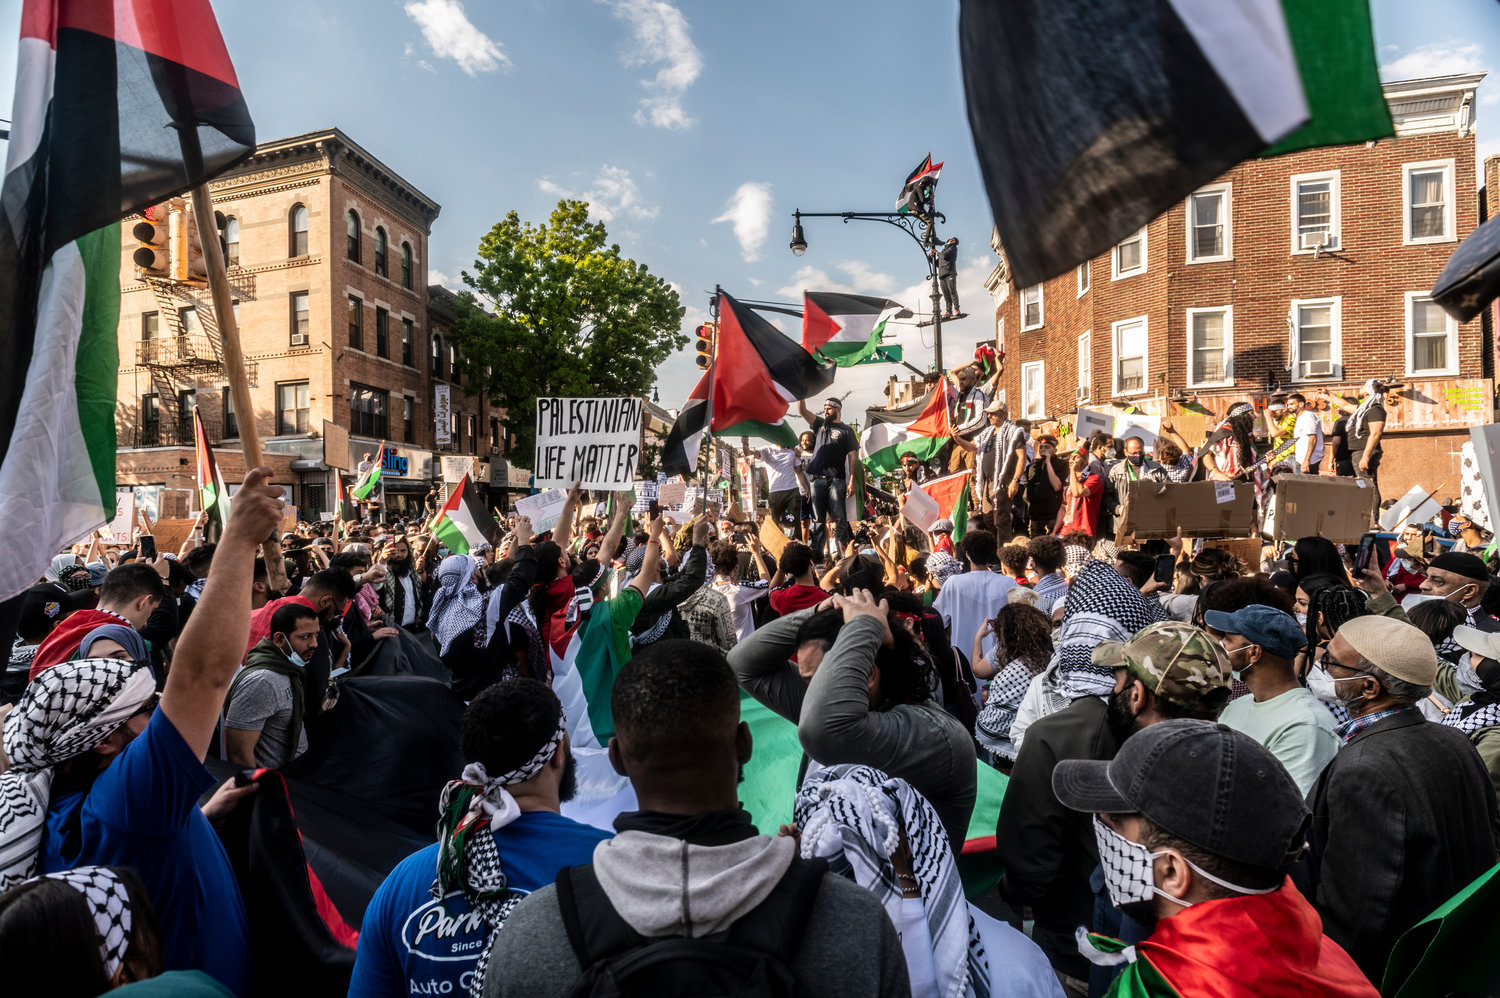 Pro-Palestinian demonstrators marched in Brooklyn’s Bay Ridge last Saturday over Israeli airstrikes in Gaza that have reportedly killed more than 212 people there. The latest conflict between Israel and Palestinians is said to have broken out after an Israeli police raid on the al-Aqsa Mosque last week.